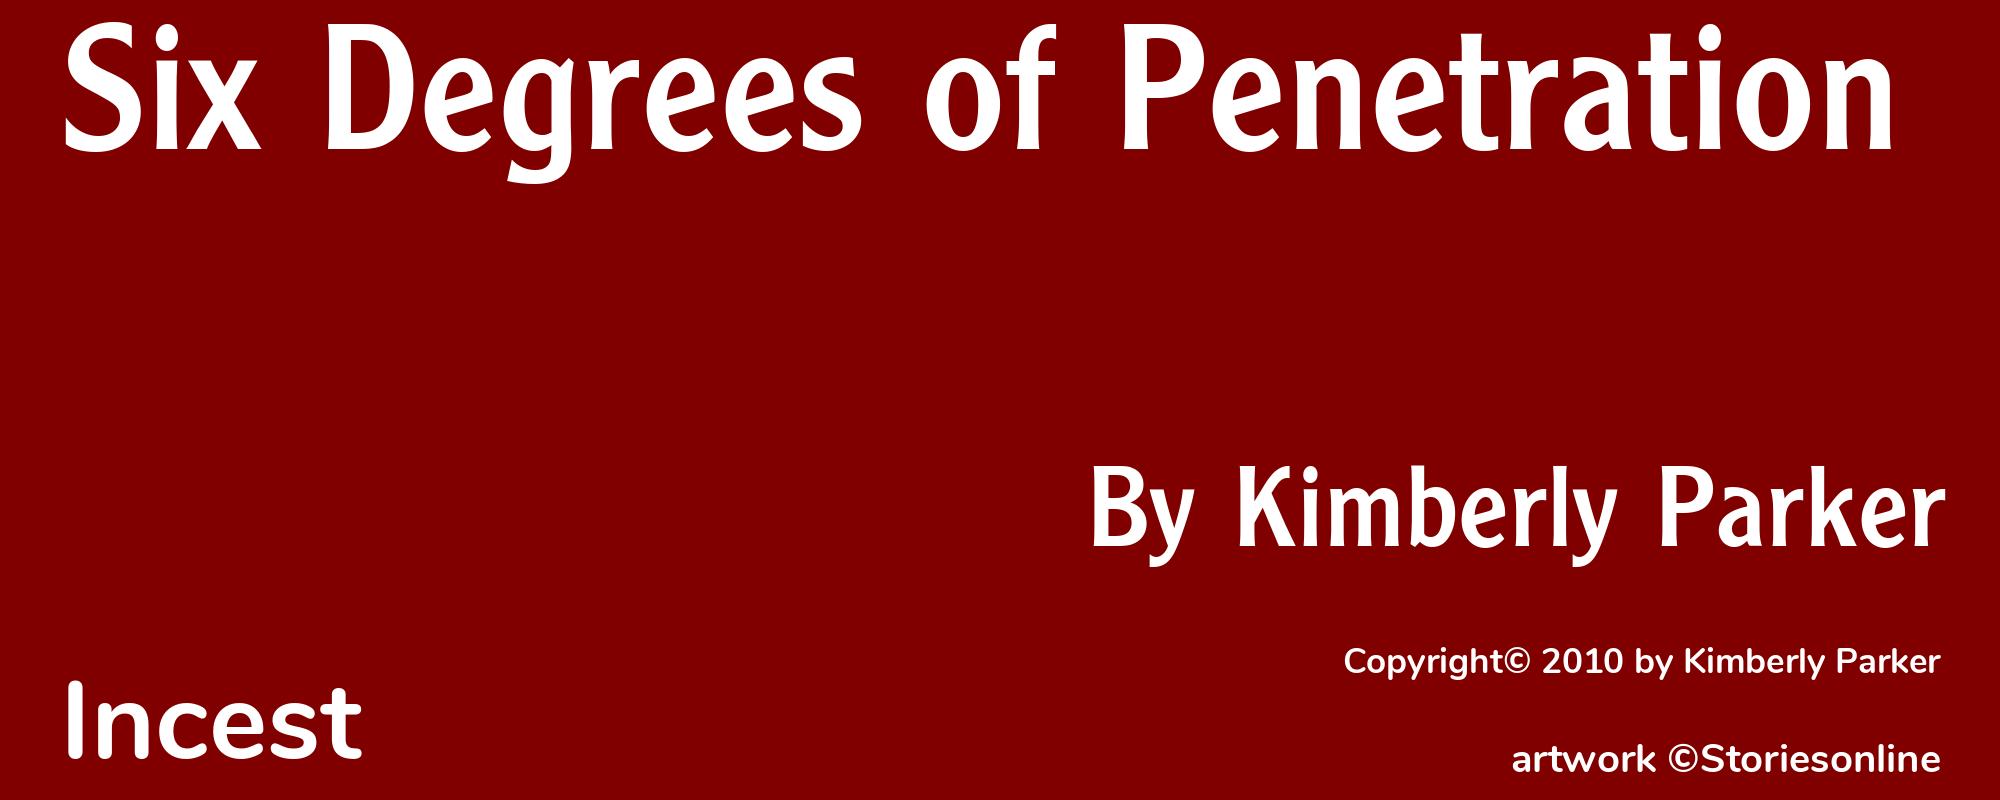 Six Degrees of Penetration - Cover